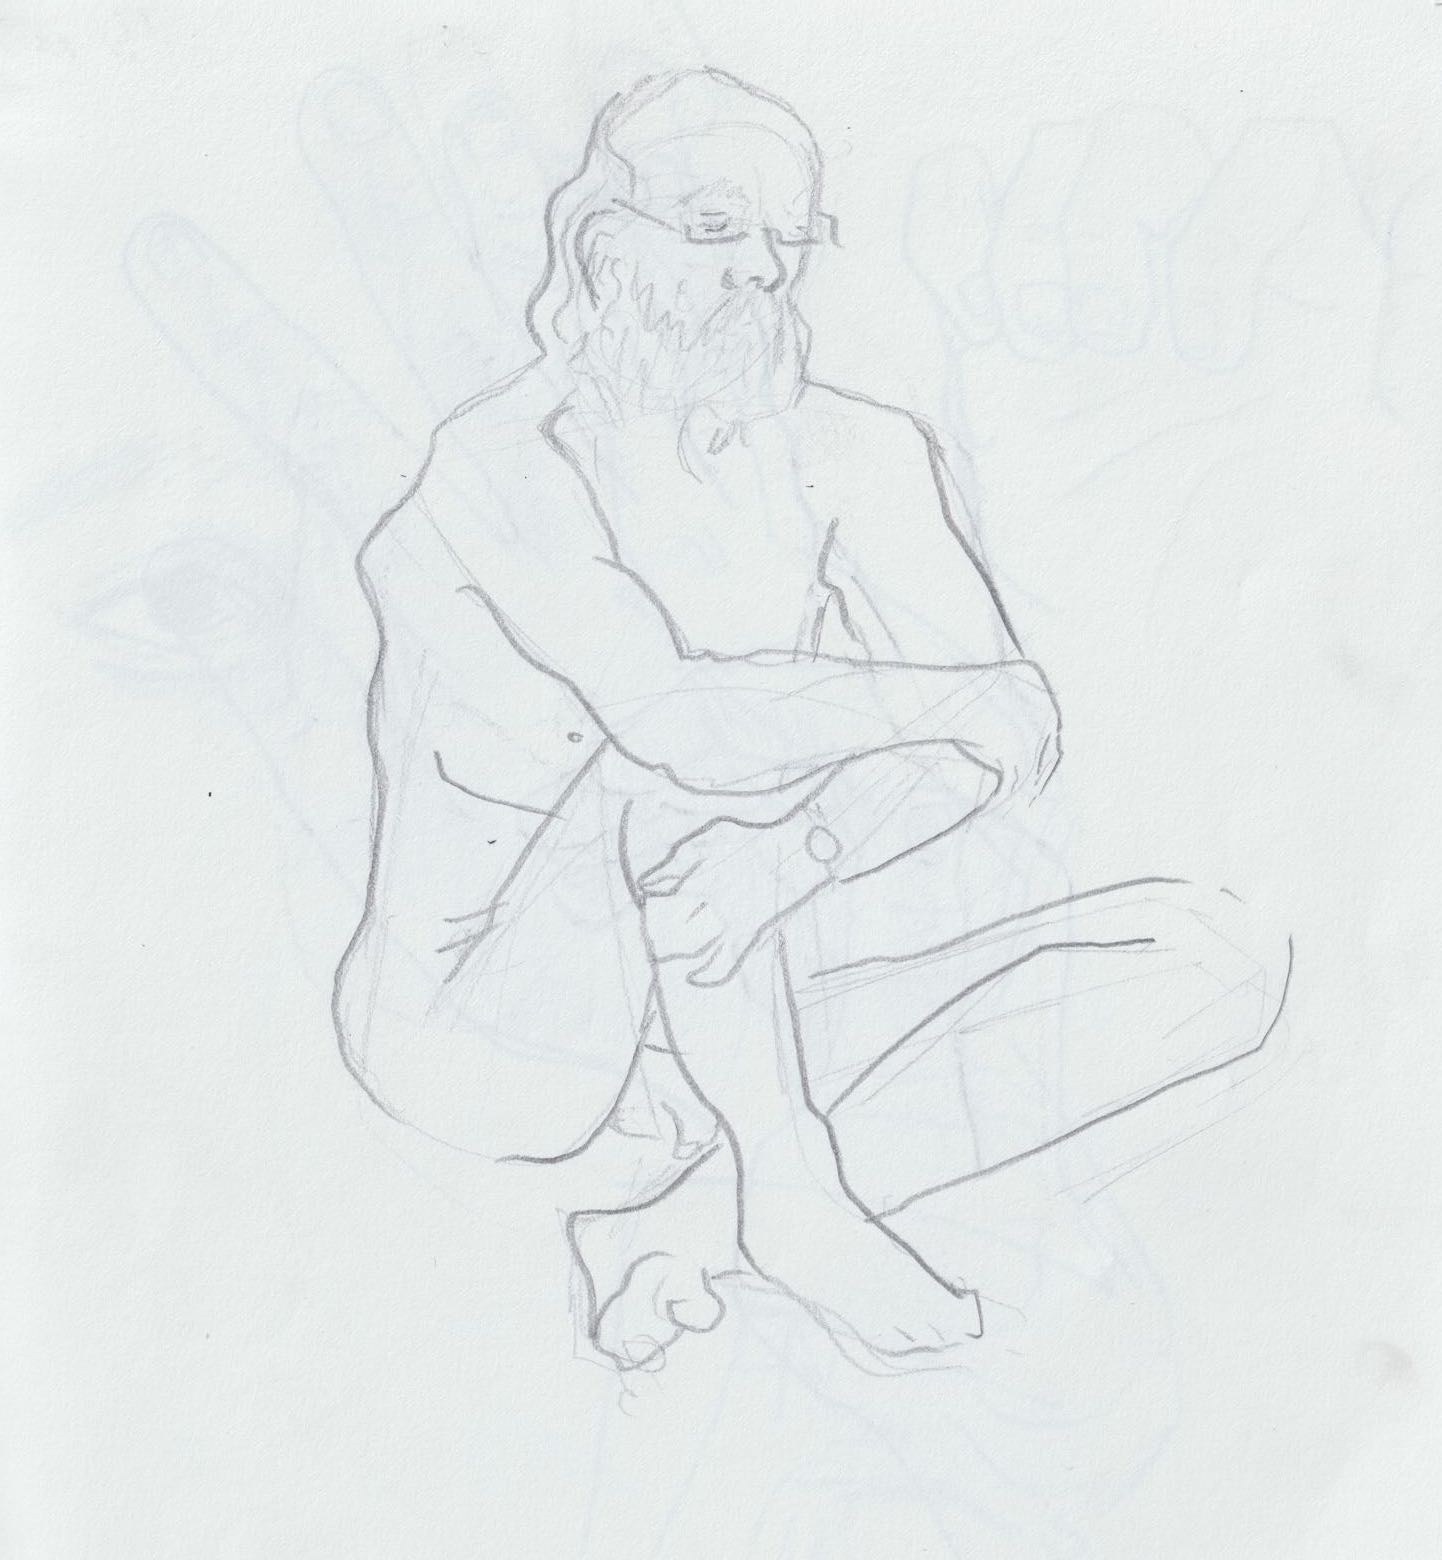 Pencil drawing of man sitting down